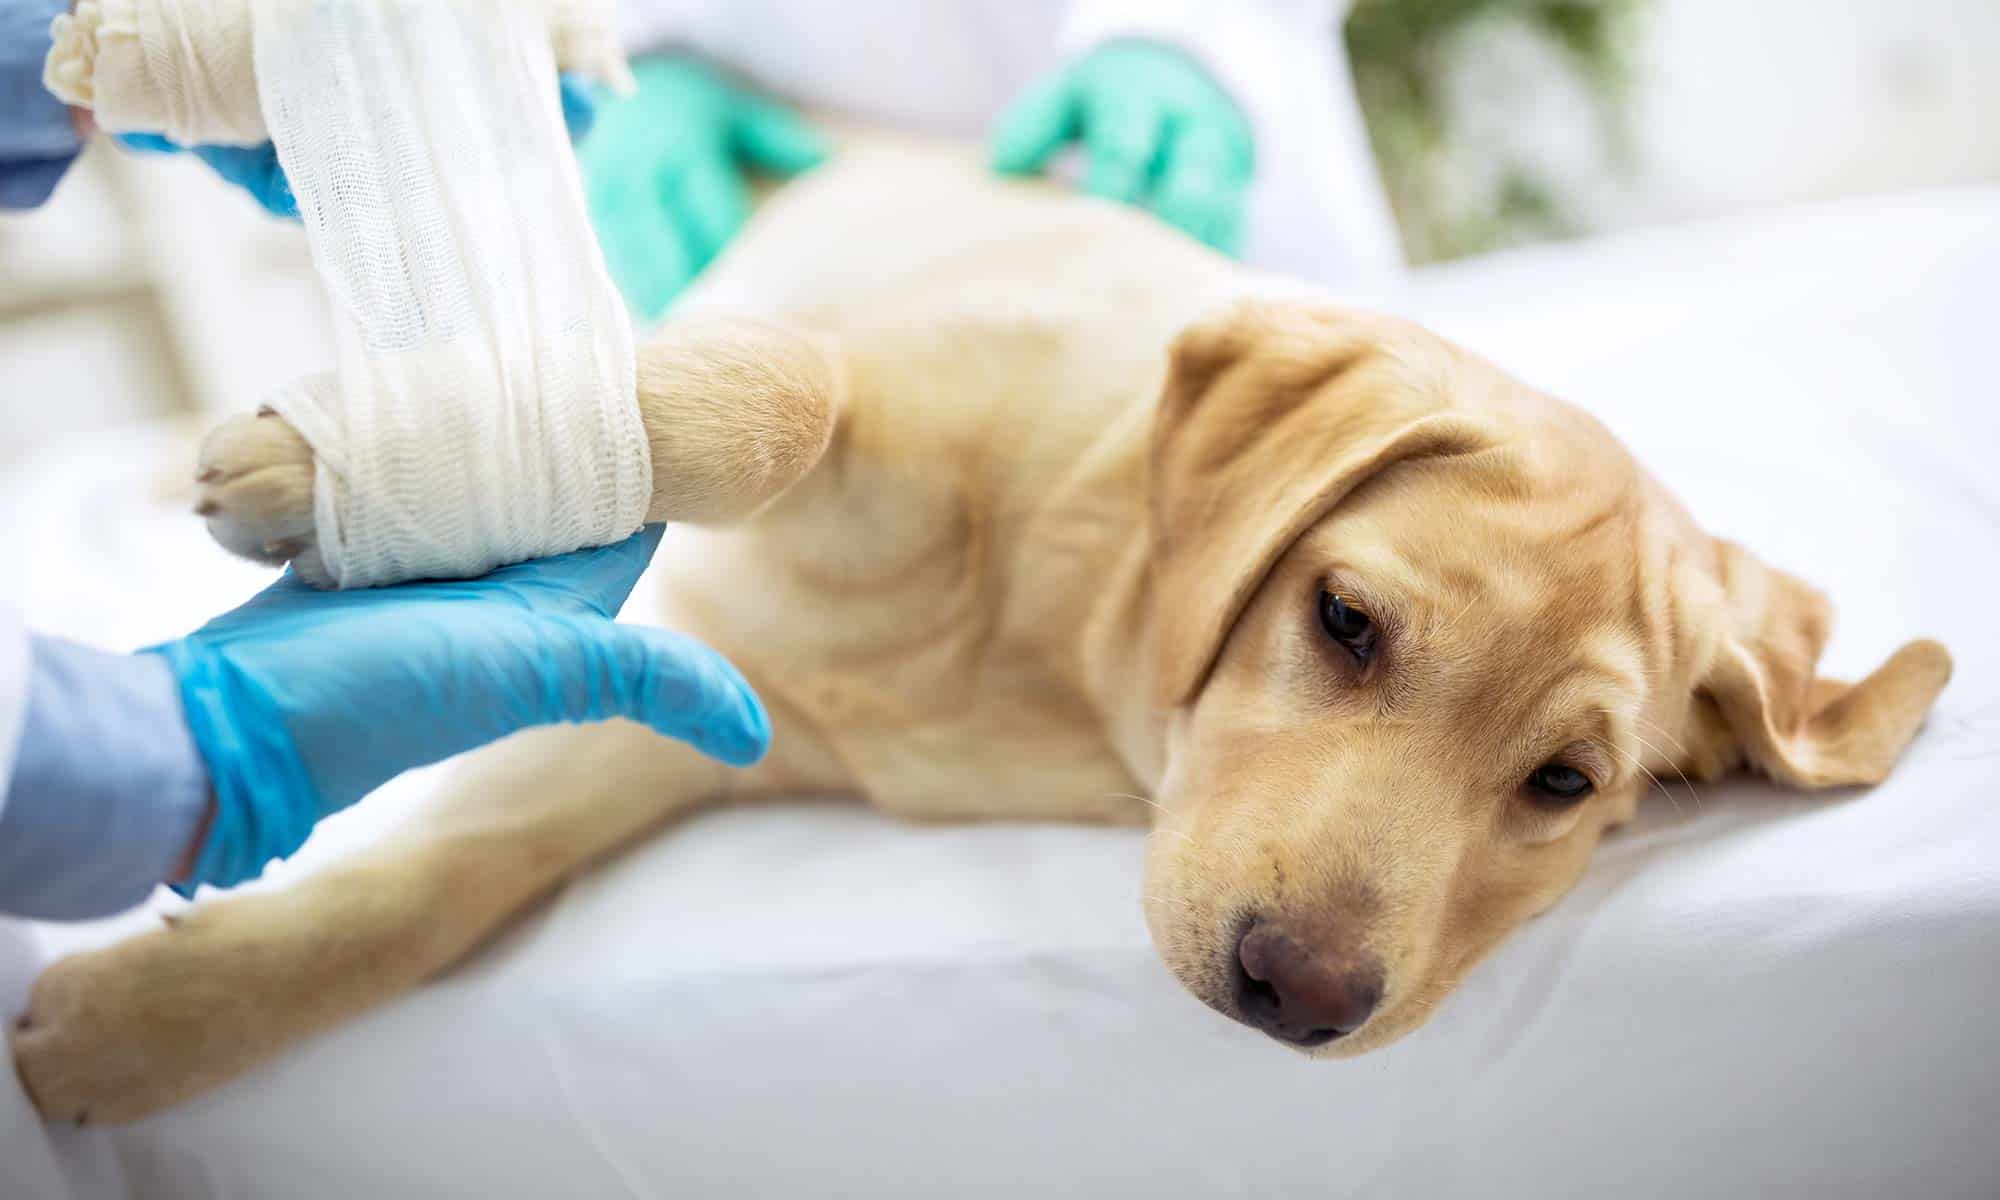 A puppy having its paw treated